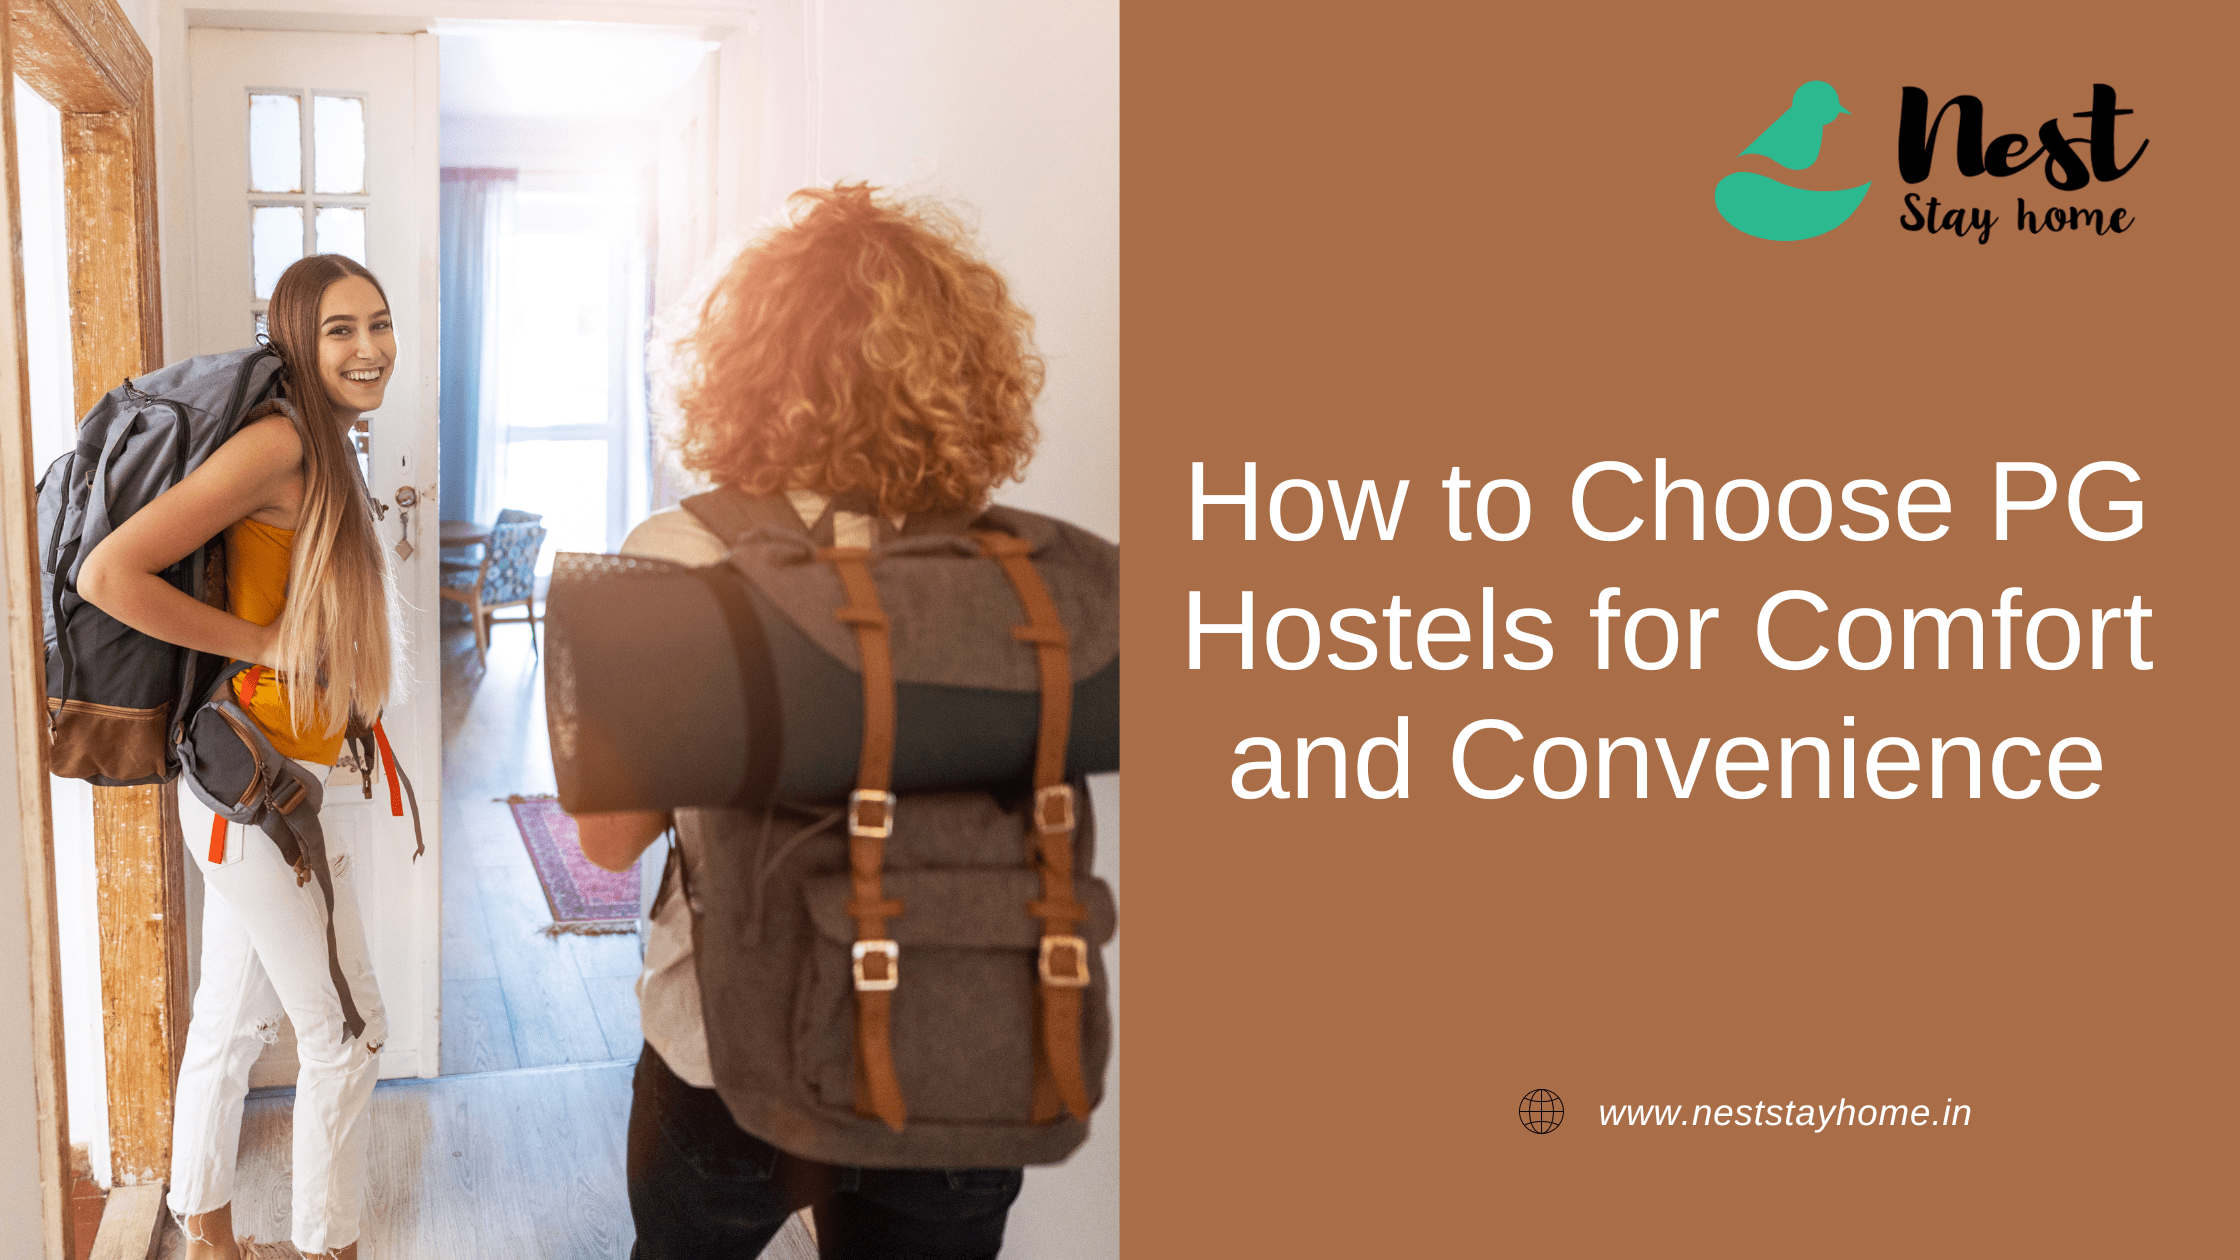 How to Choose PG Hostels for Comfort and Convenience